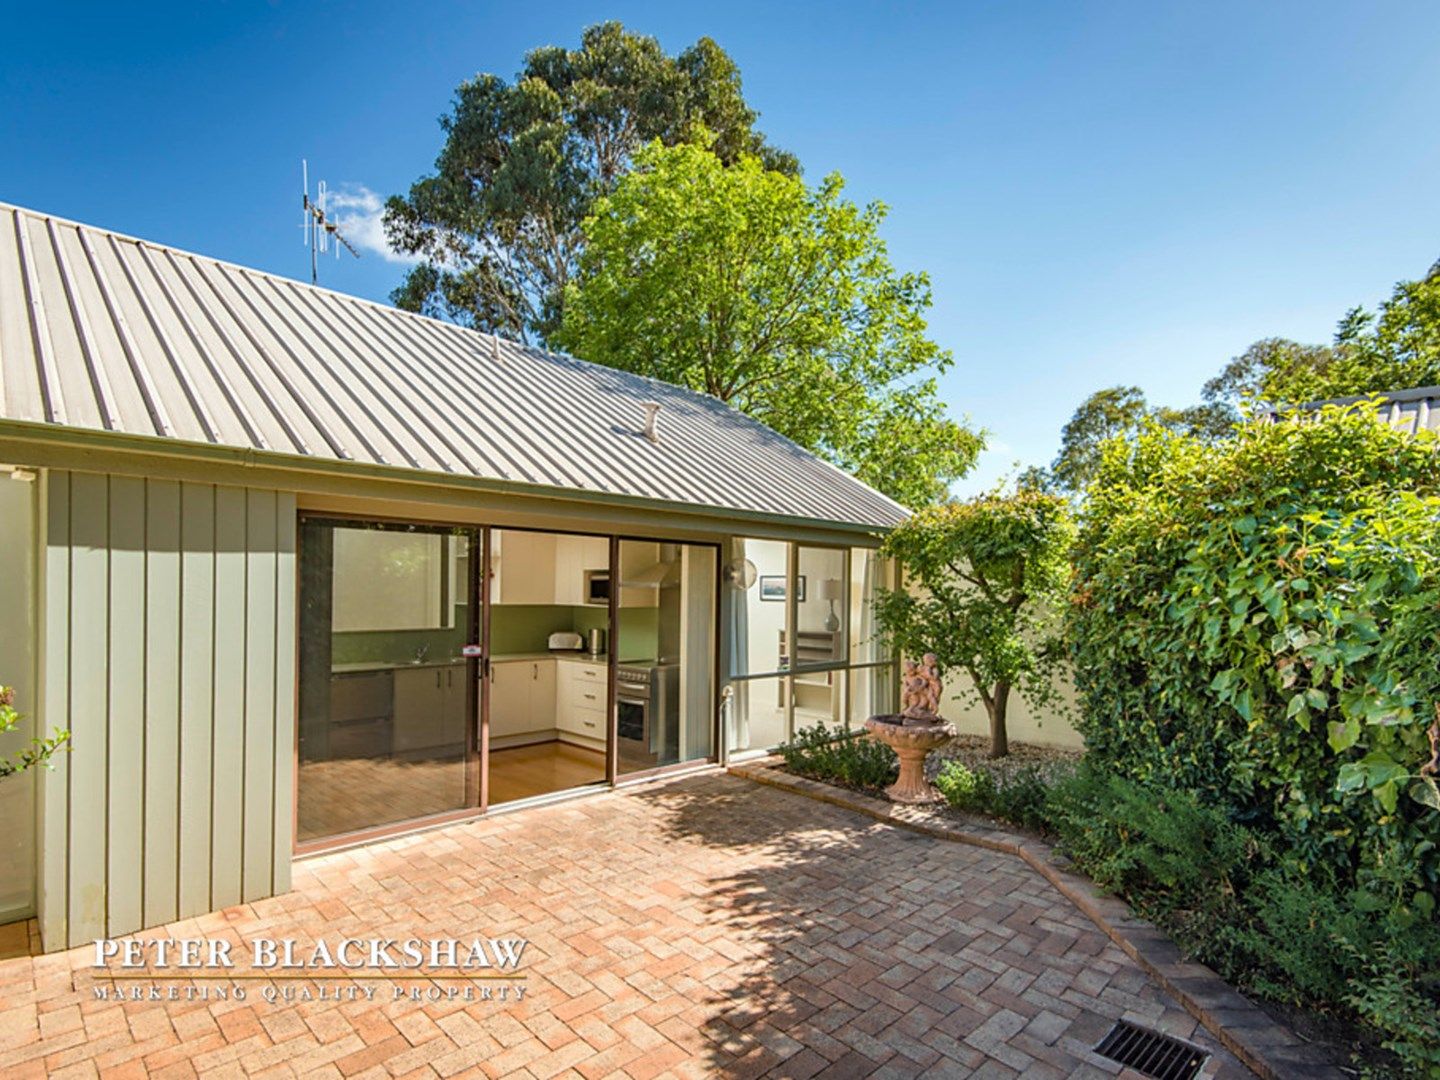 15/18 Marr Street, Pearce ACT 2607, Image 0